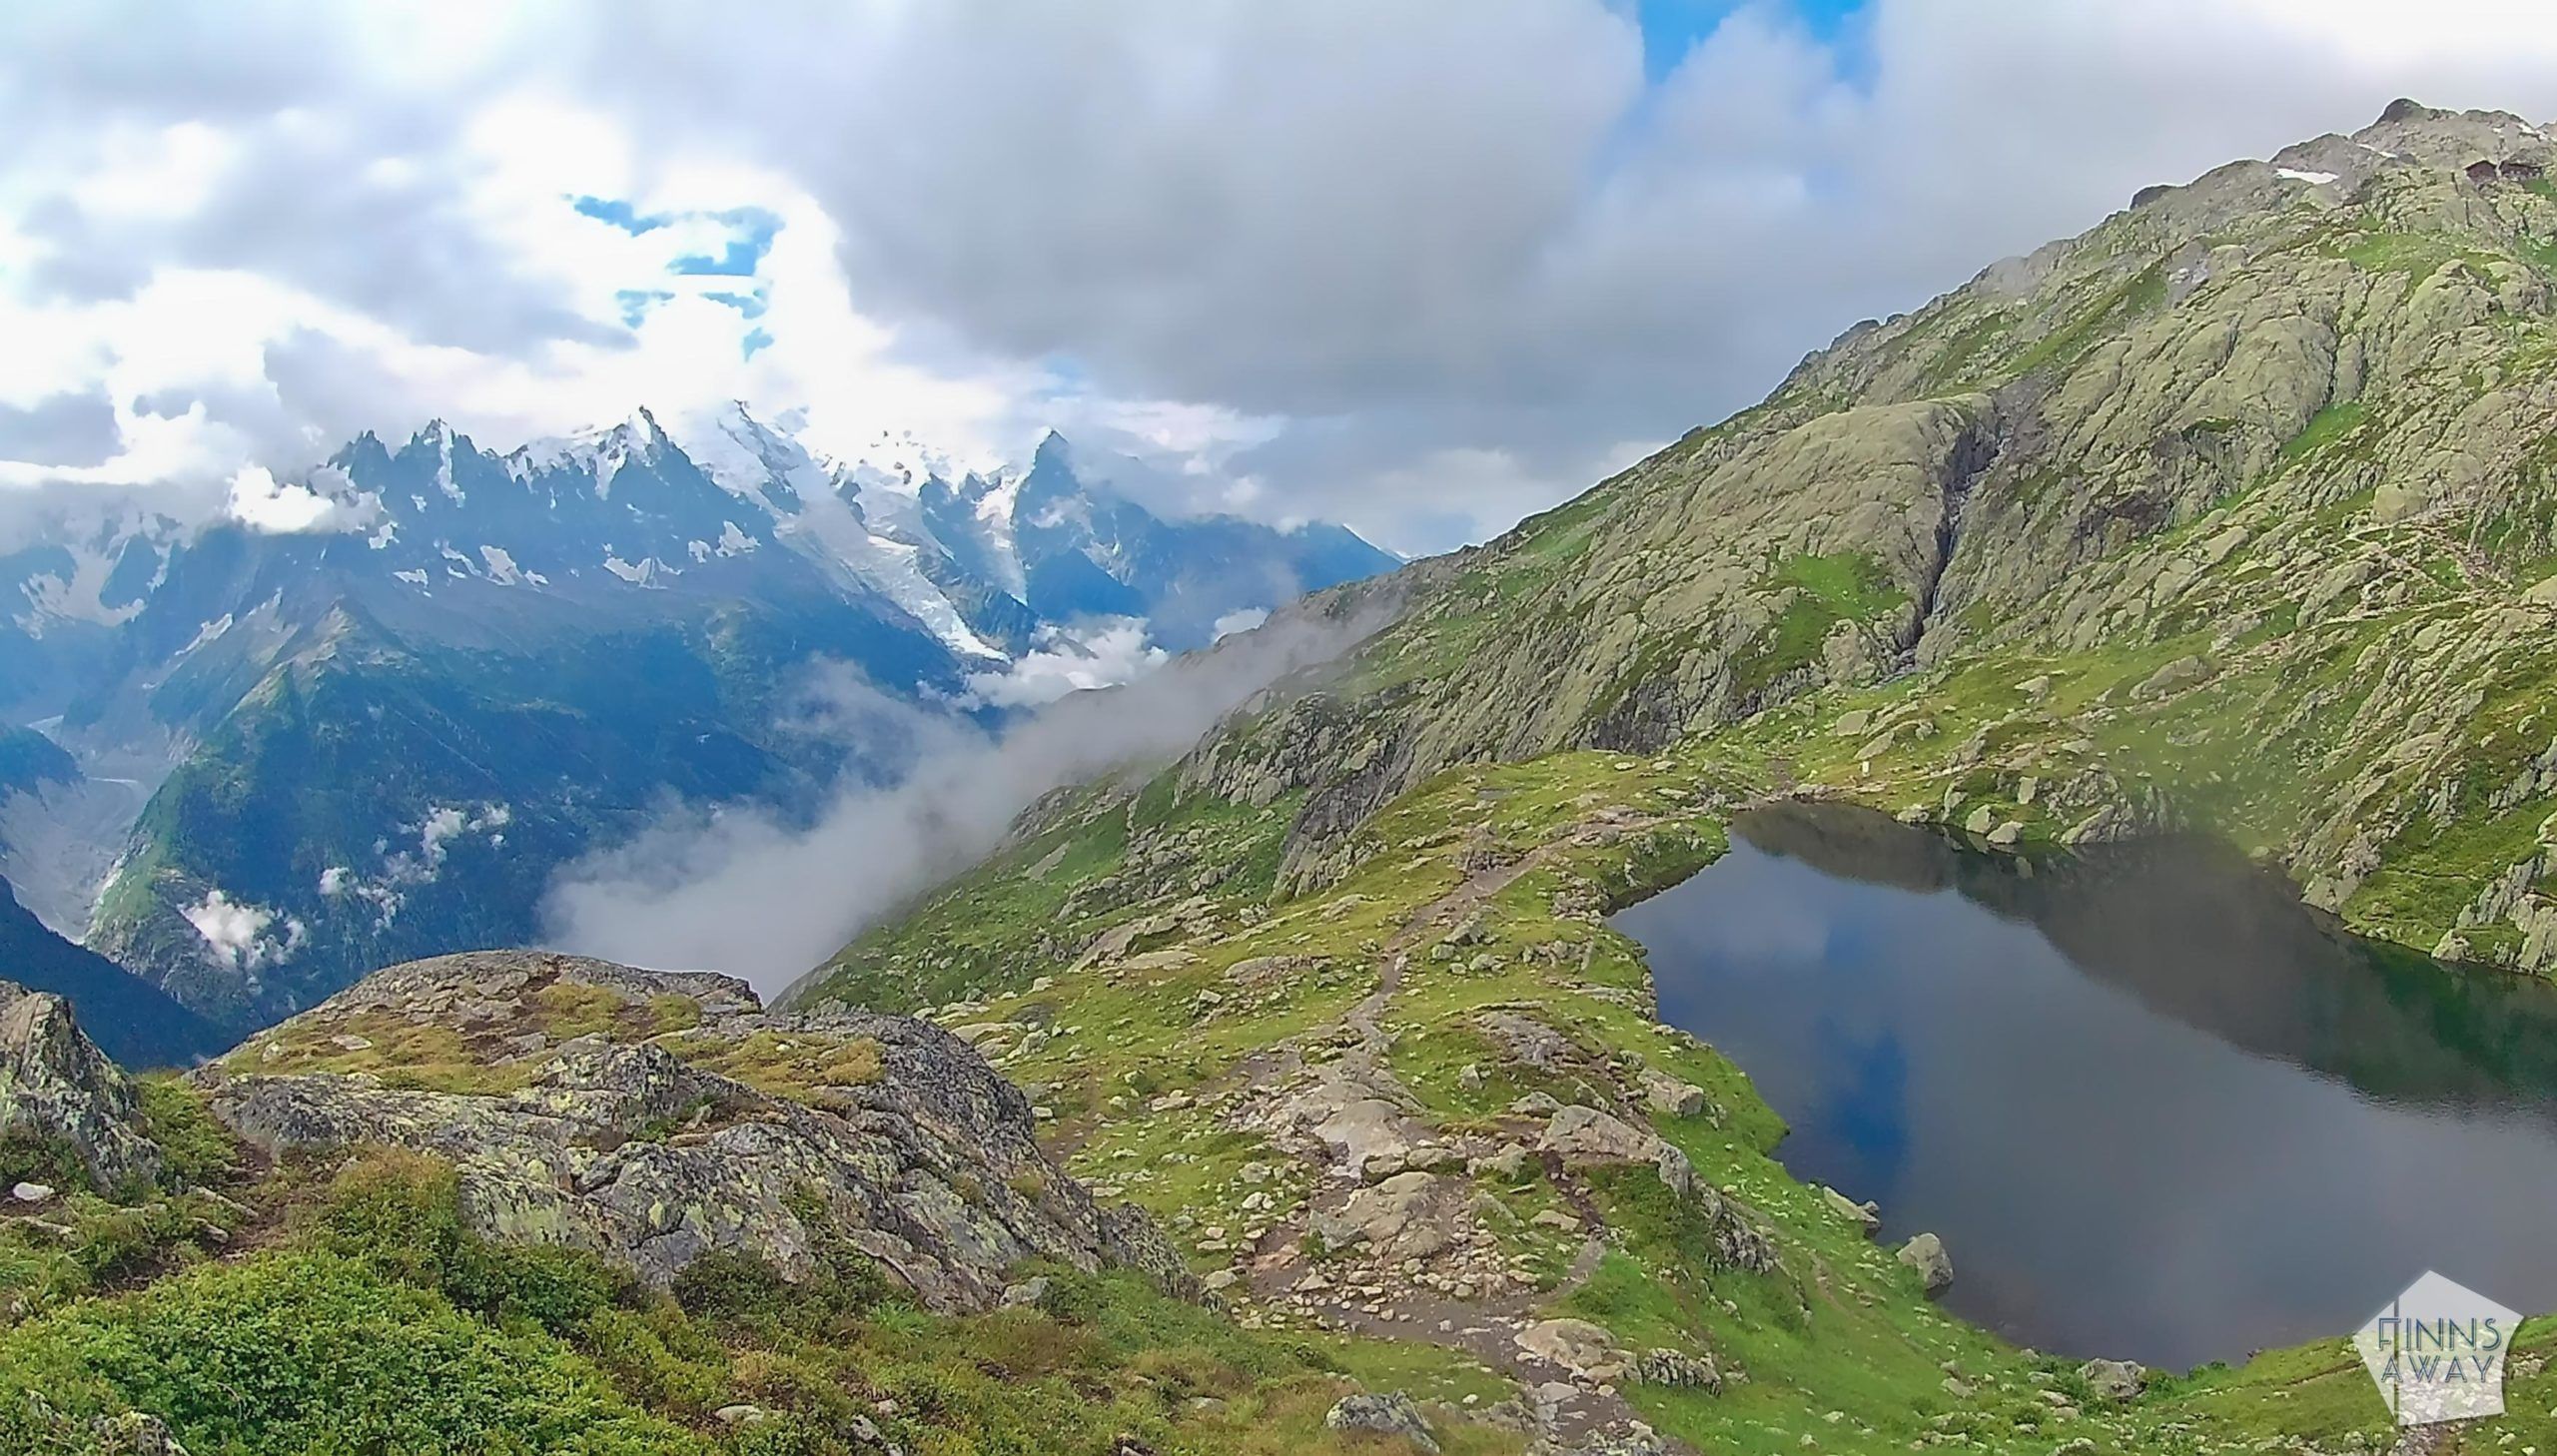 Lacs de Cheserys | Hiking and camping Tour du Mont Blanc mountain trail in the Alps | FinnsAway travel blog